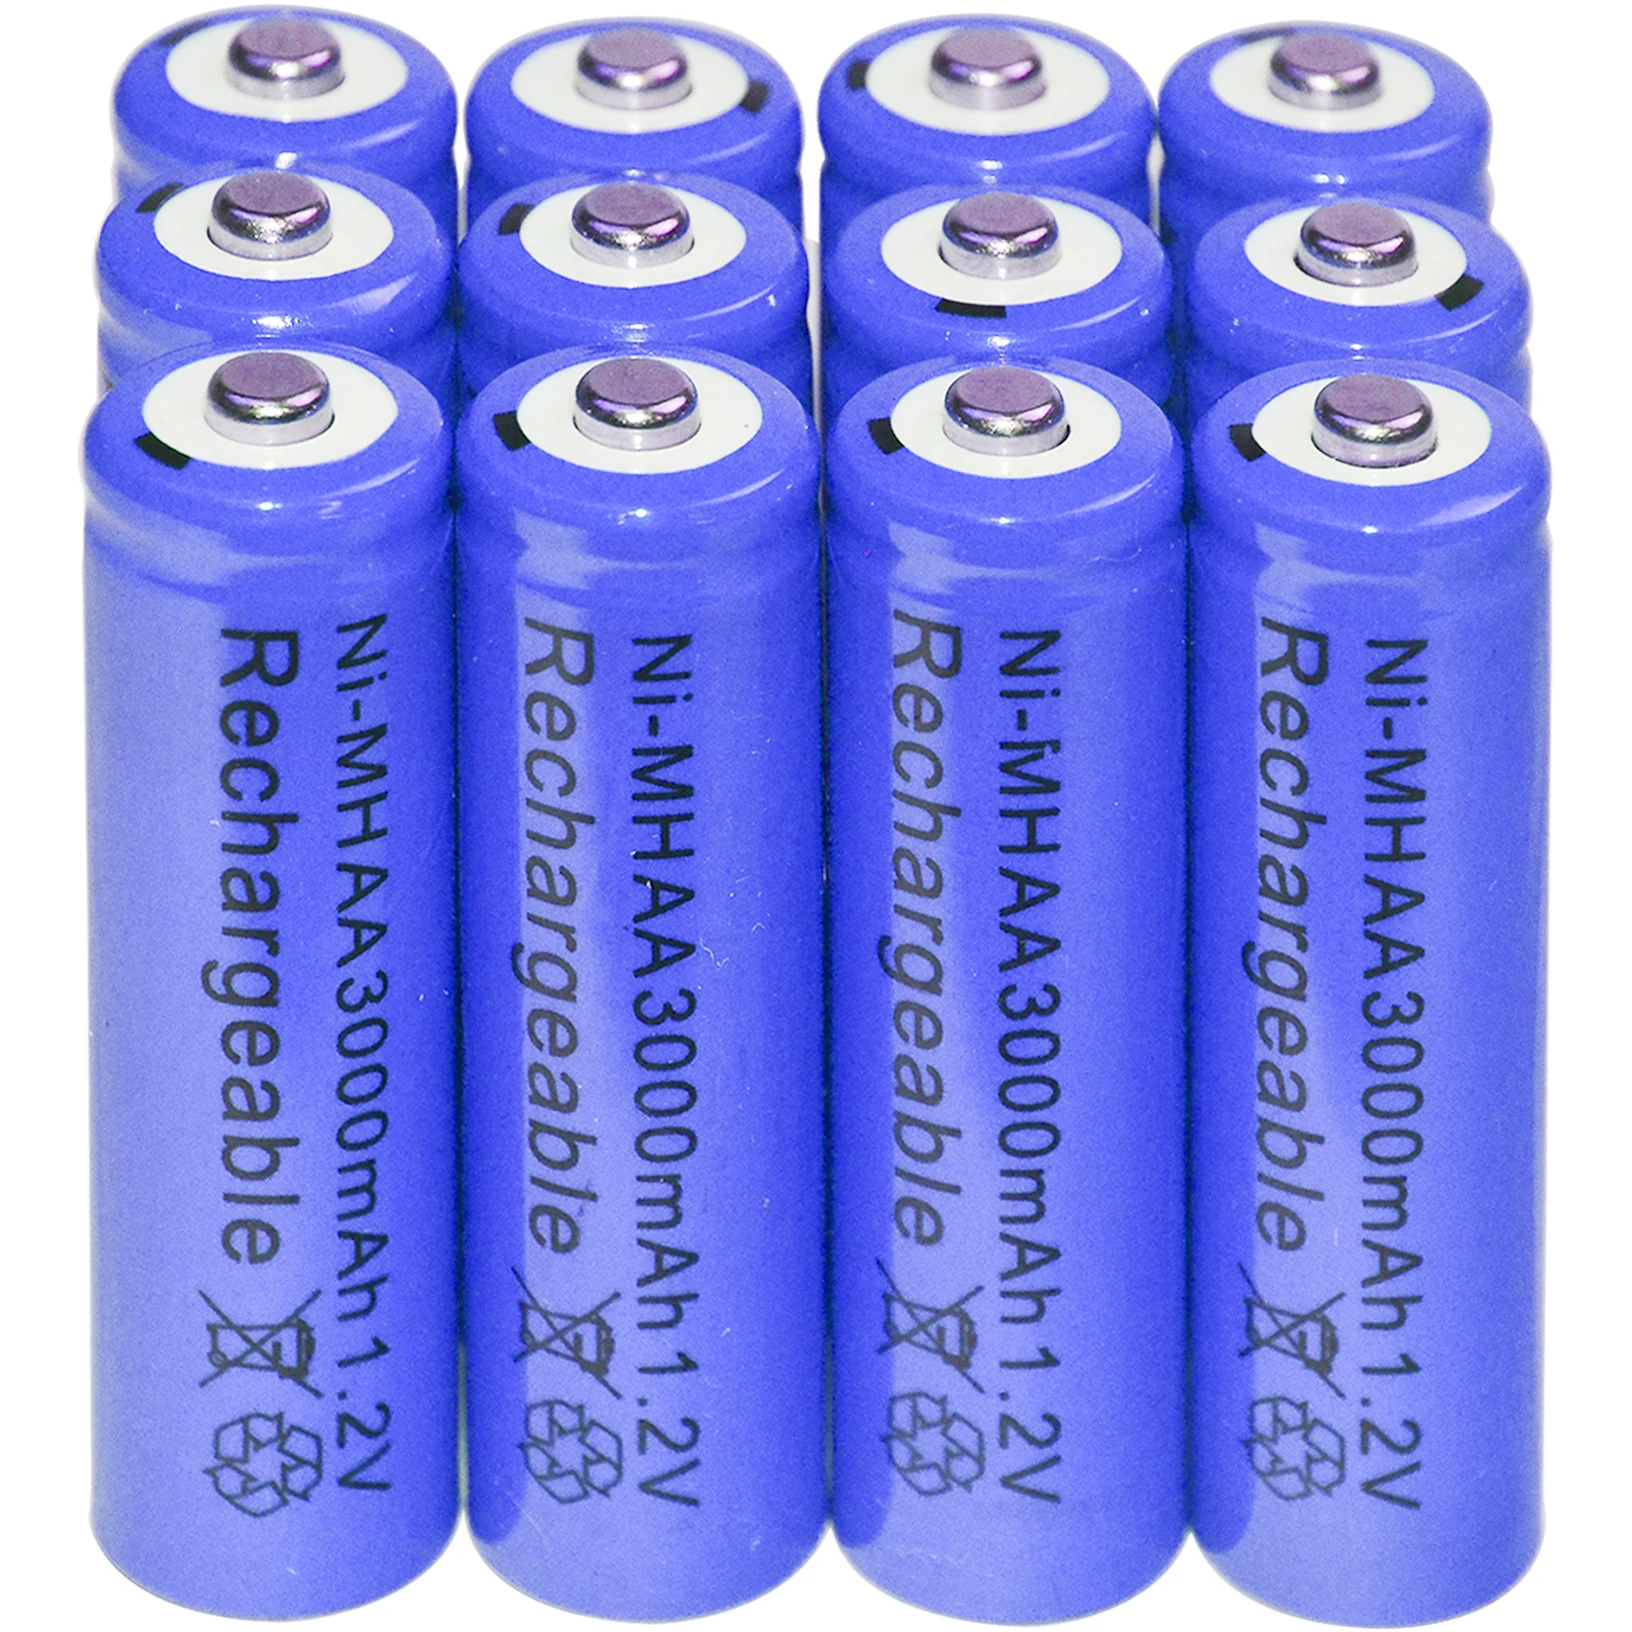 4-48pcs New Brand AA rechargeable battery 3000mah 1.2V NI-MH Rechargeable for led light toy mp3 Blue | Электроника